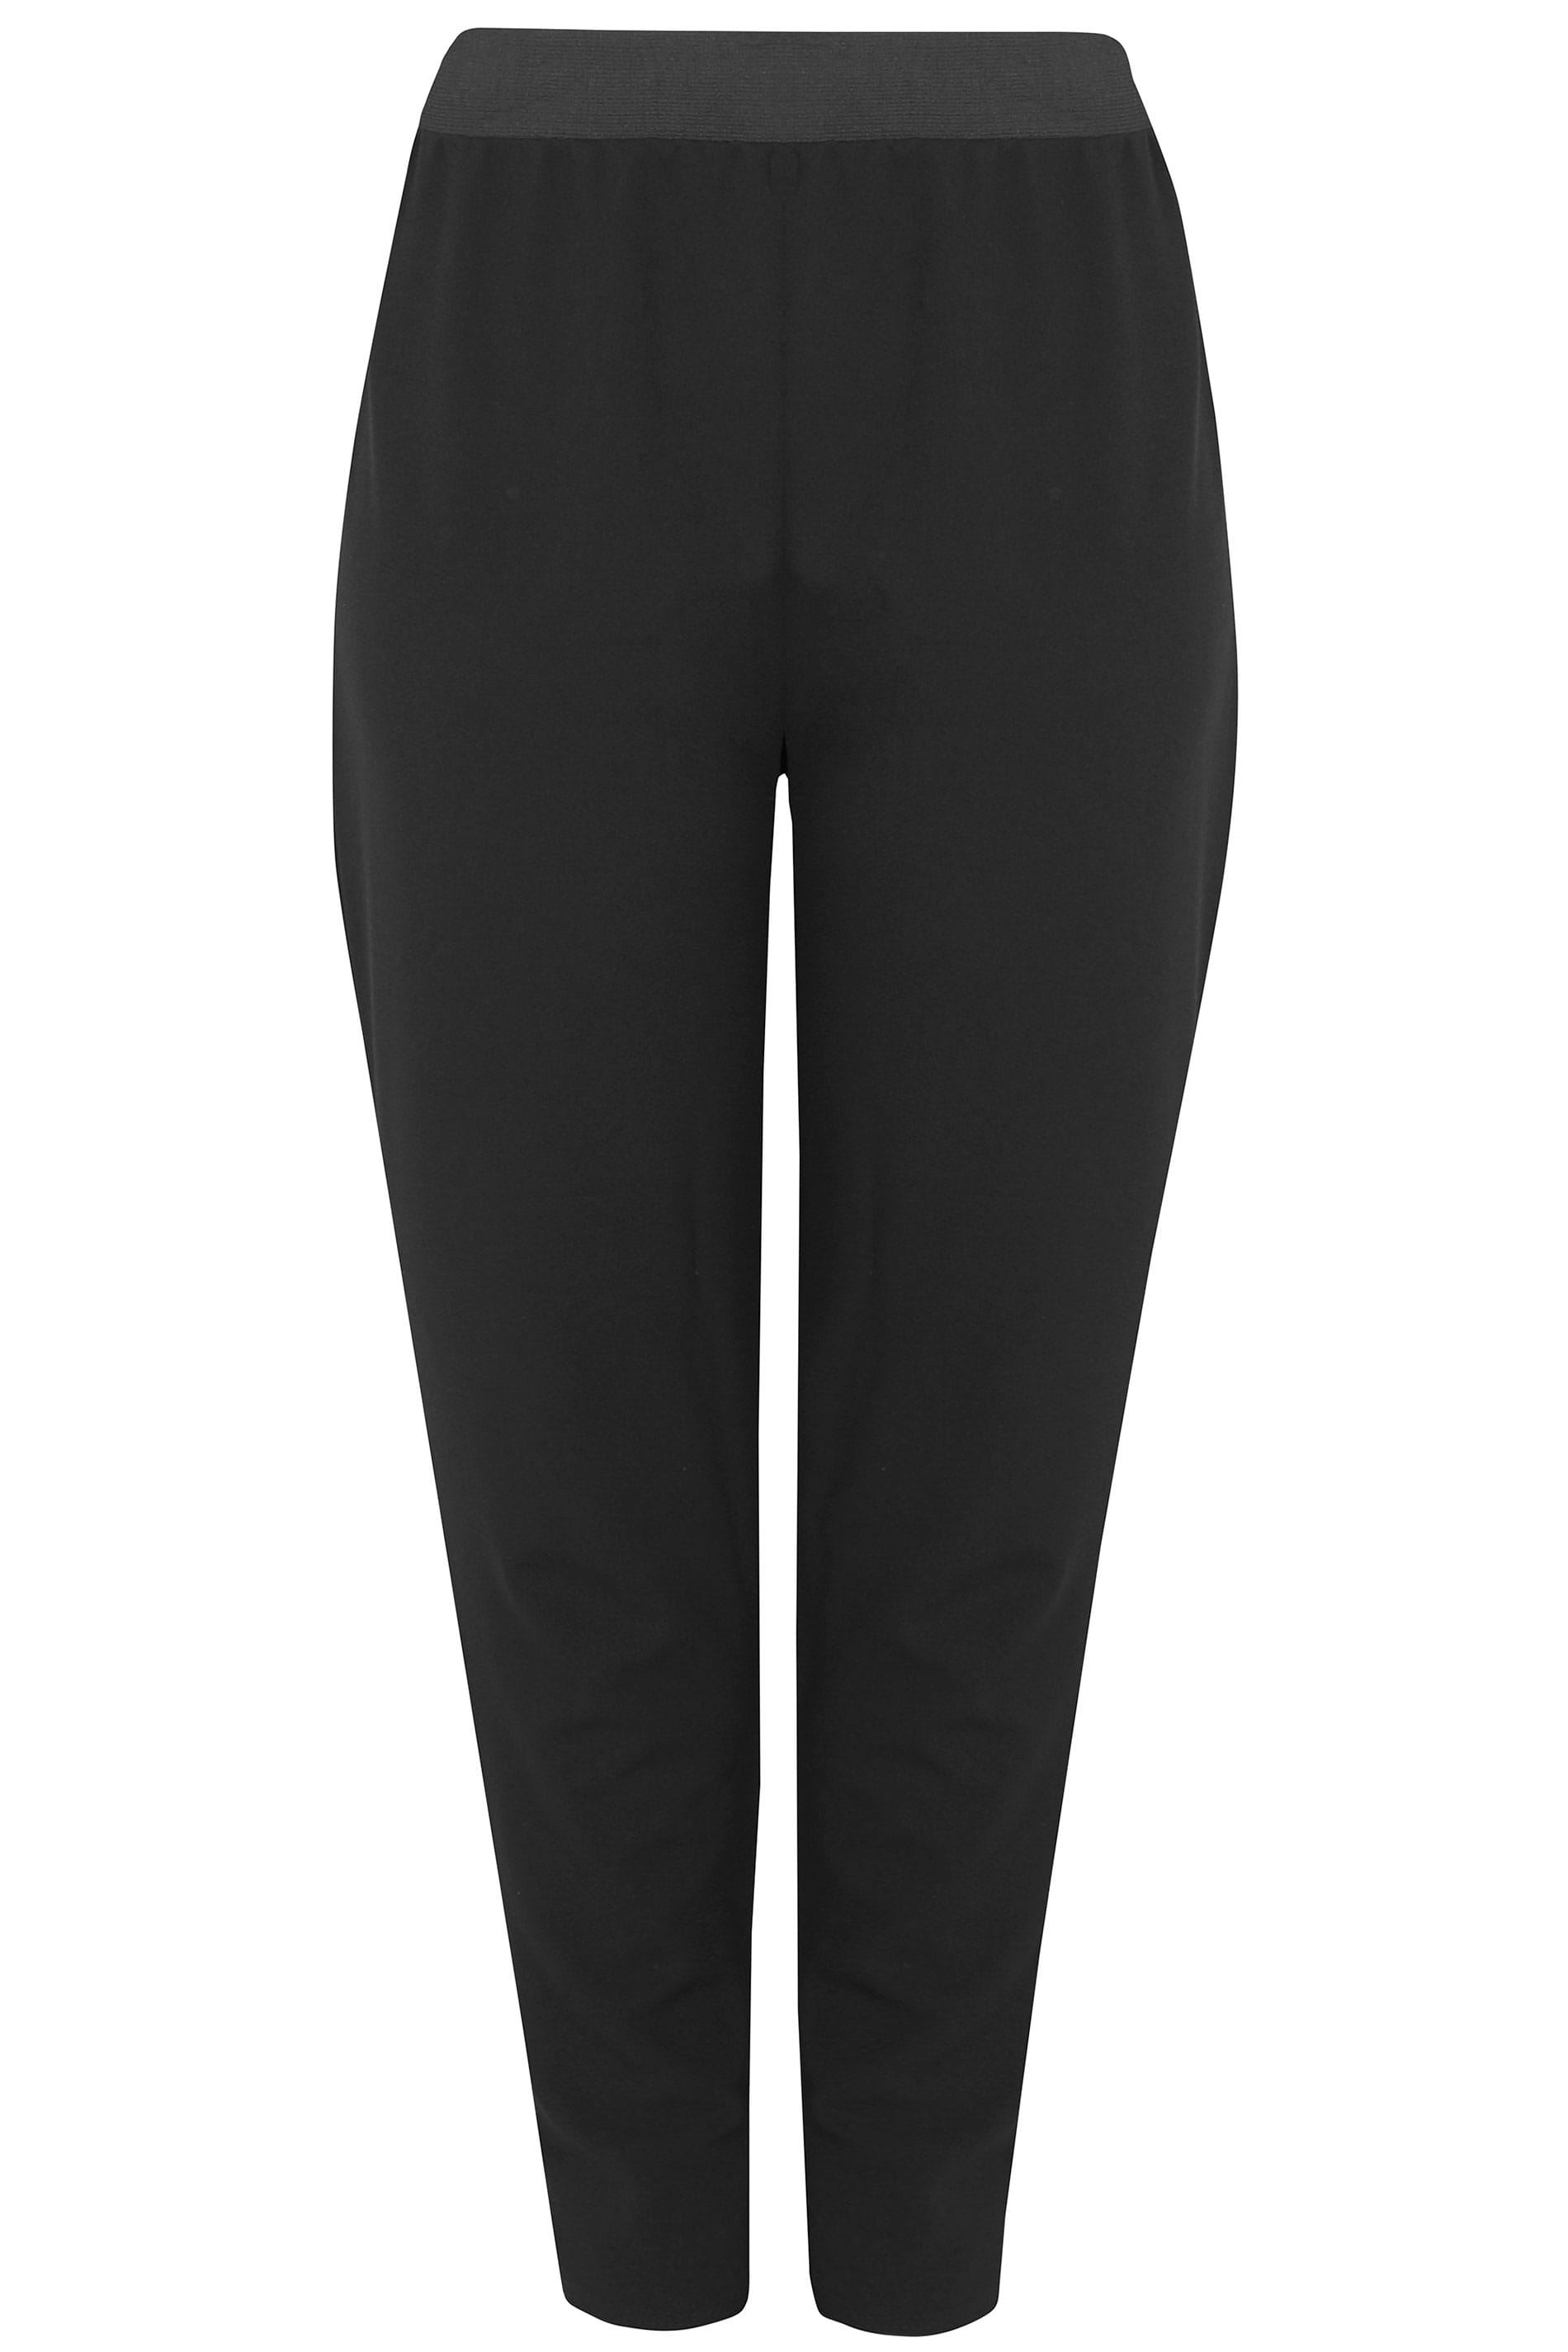 YOURS LONDON Curve Black Jersey Stretch Tapered Trouser - Petite | Yours Clothing 3